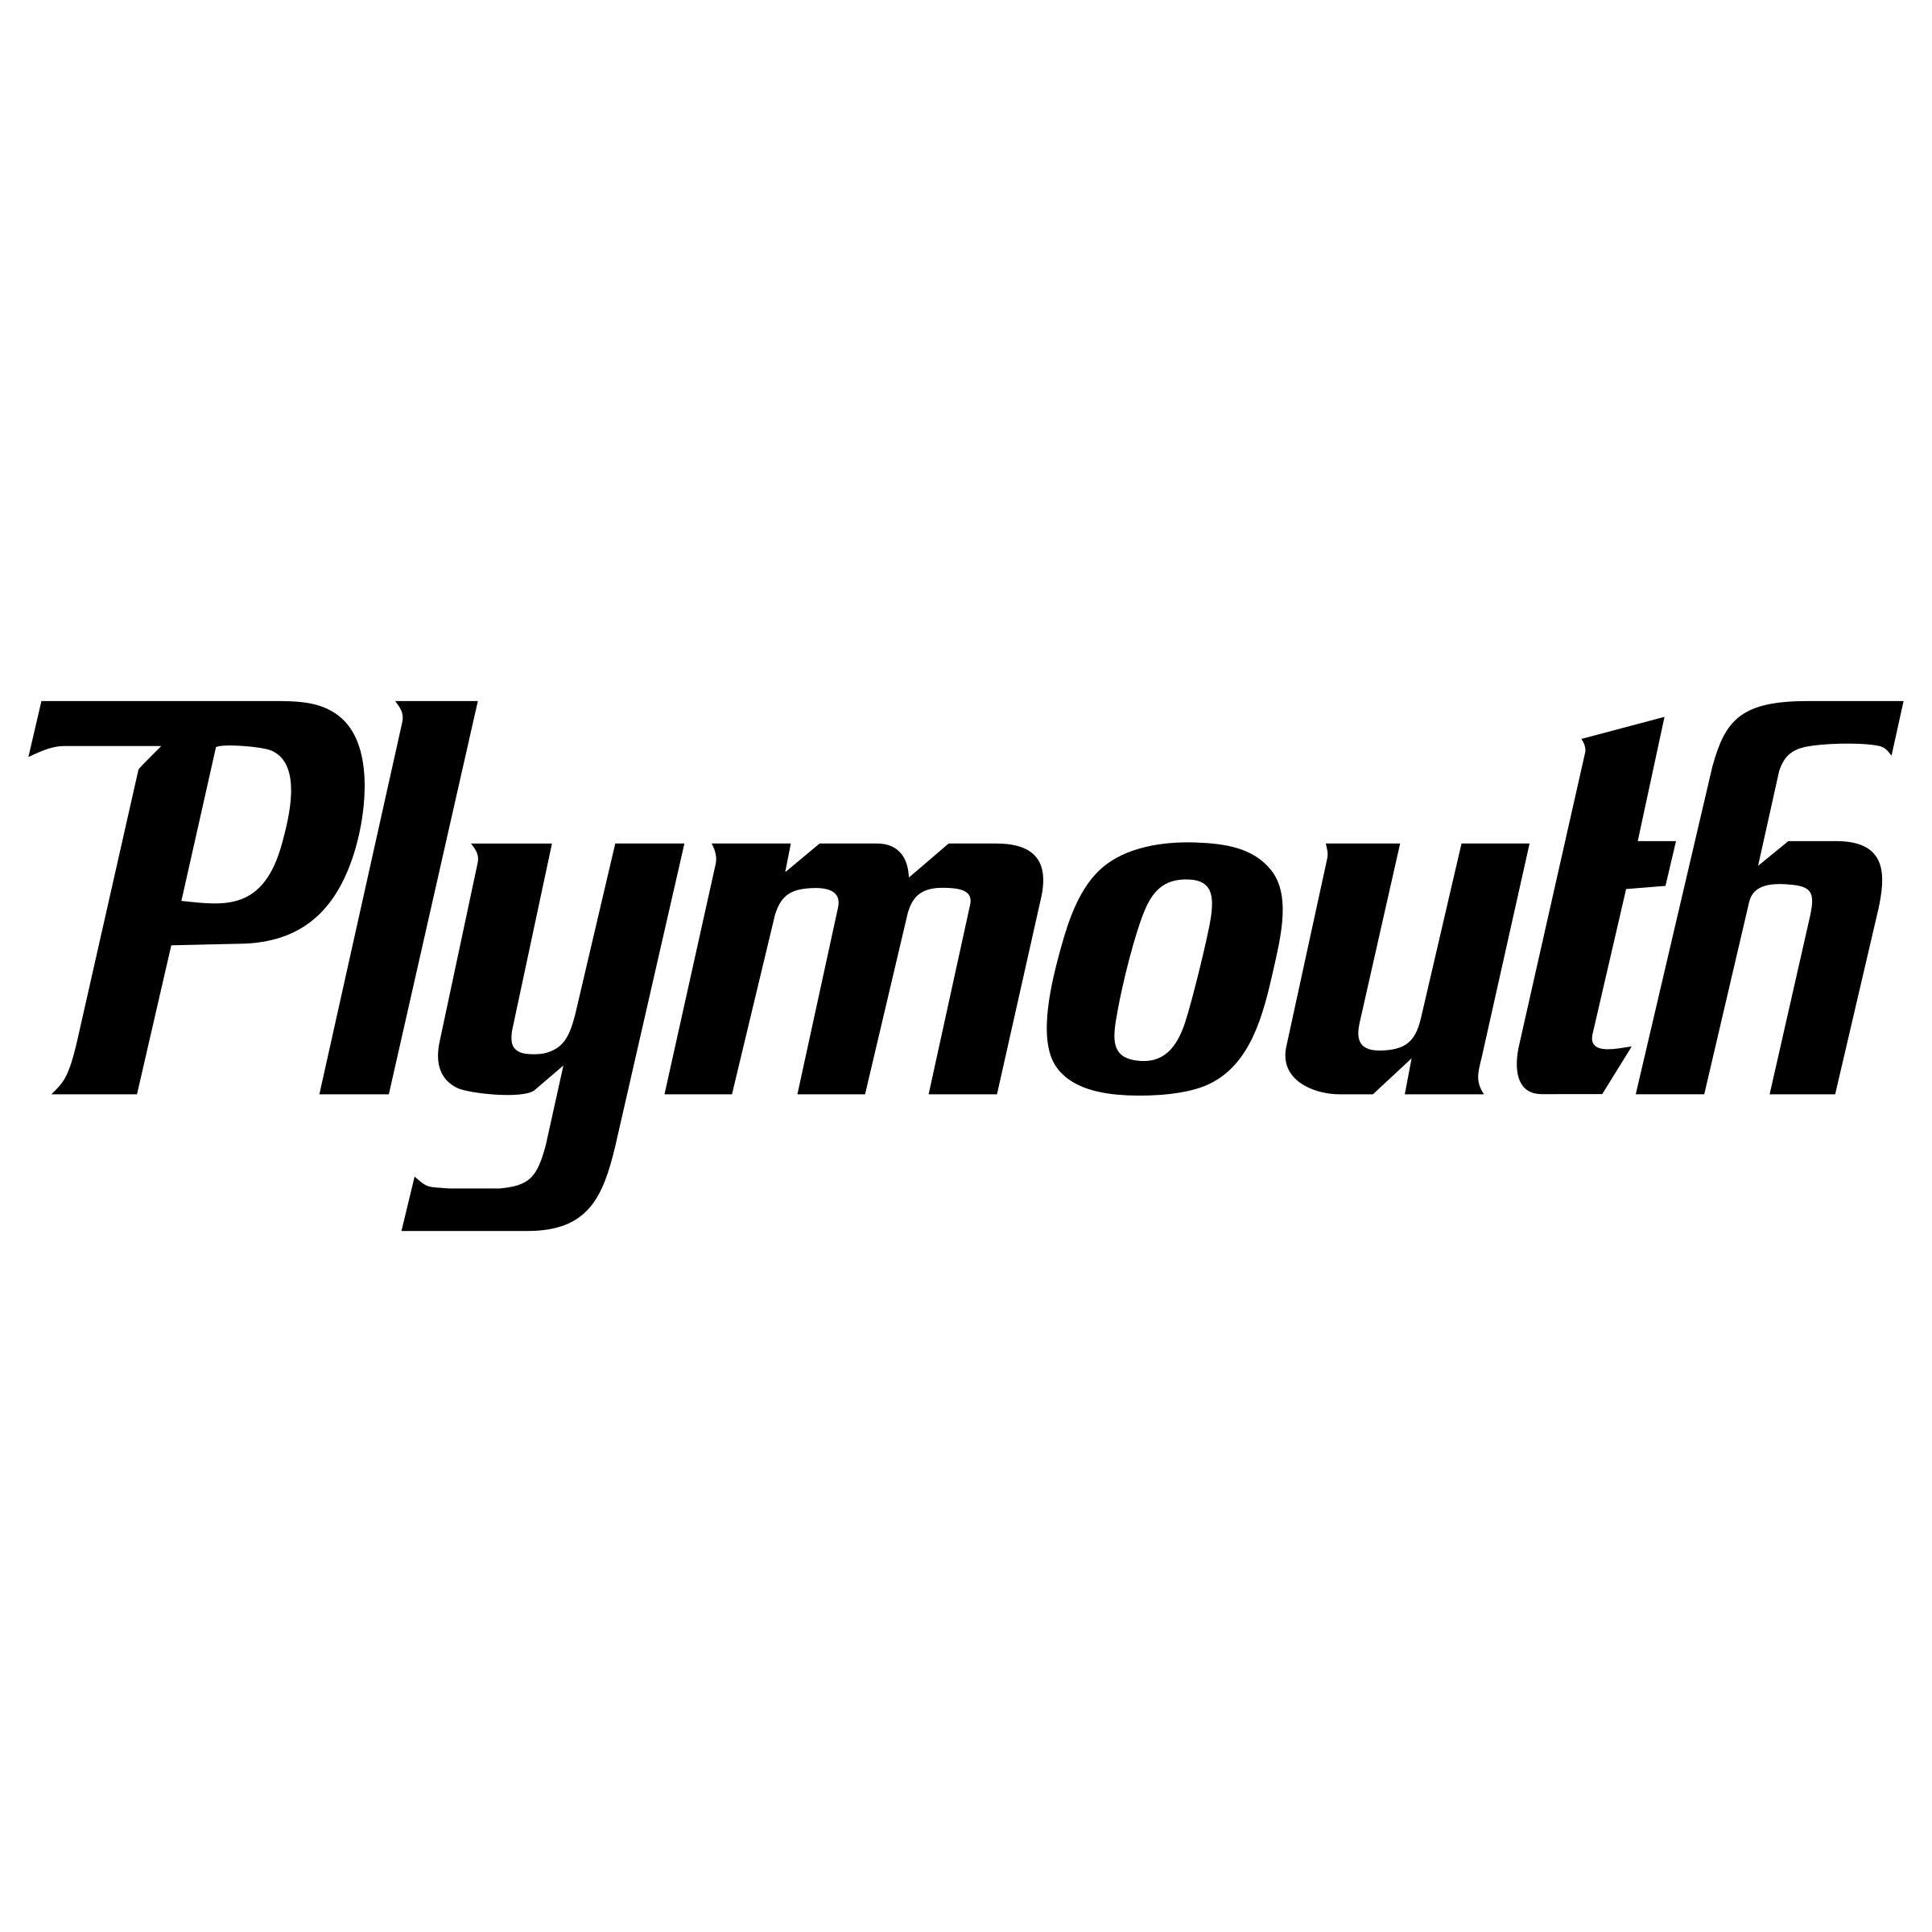 Plymouth Logo - Plymouth Logo PNG Transparent & SVG Vector - Freebie Supply